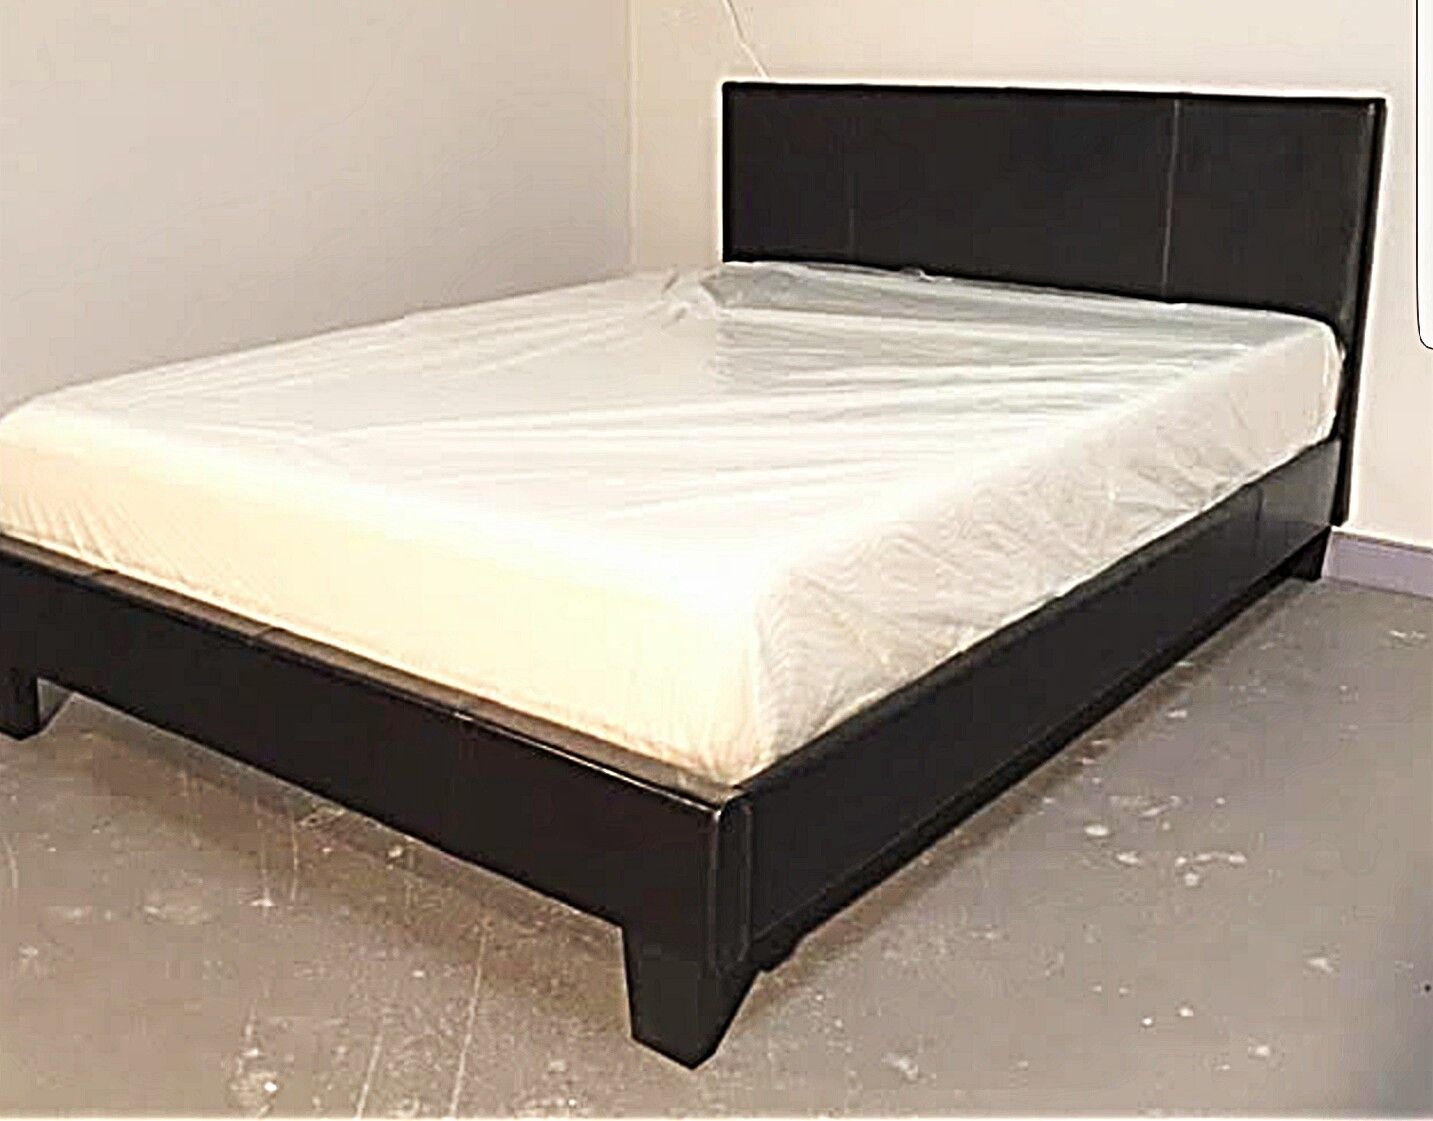 BRAND NEW FULL SIZE BED AND MATTRESS (FREE DELIVERY)